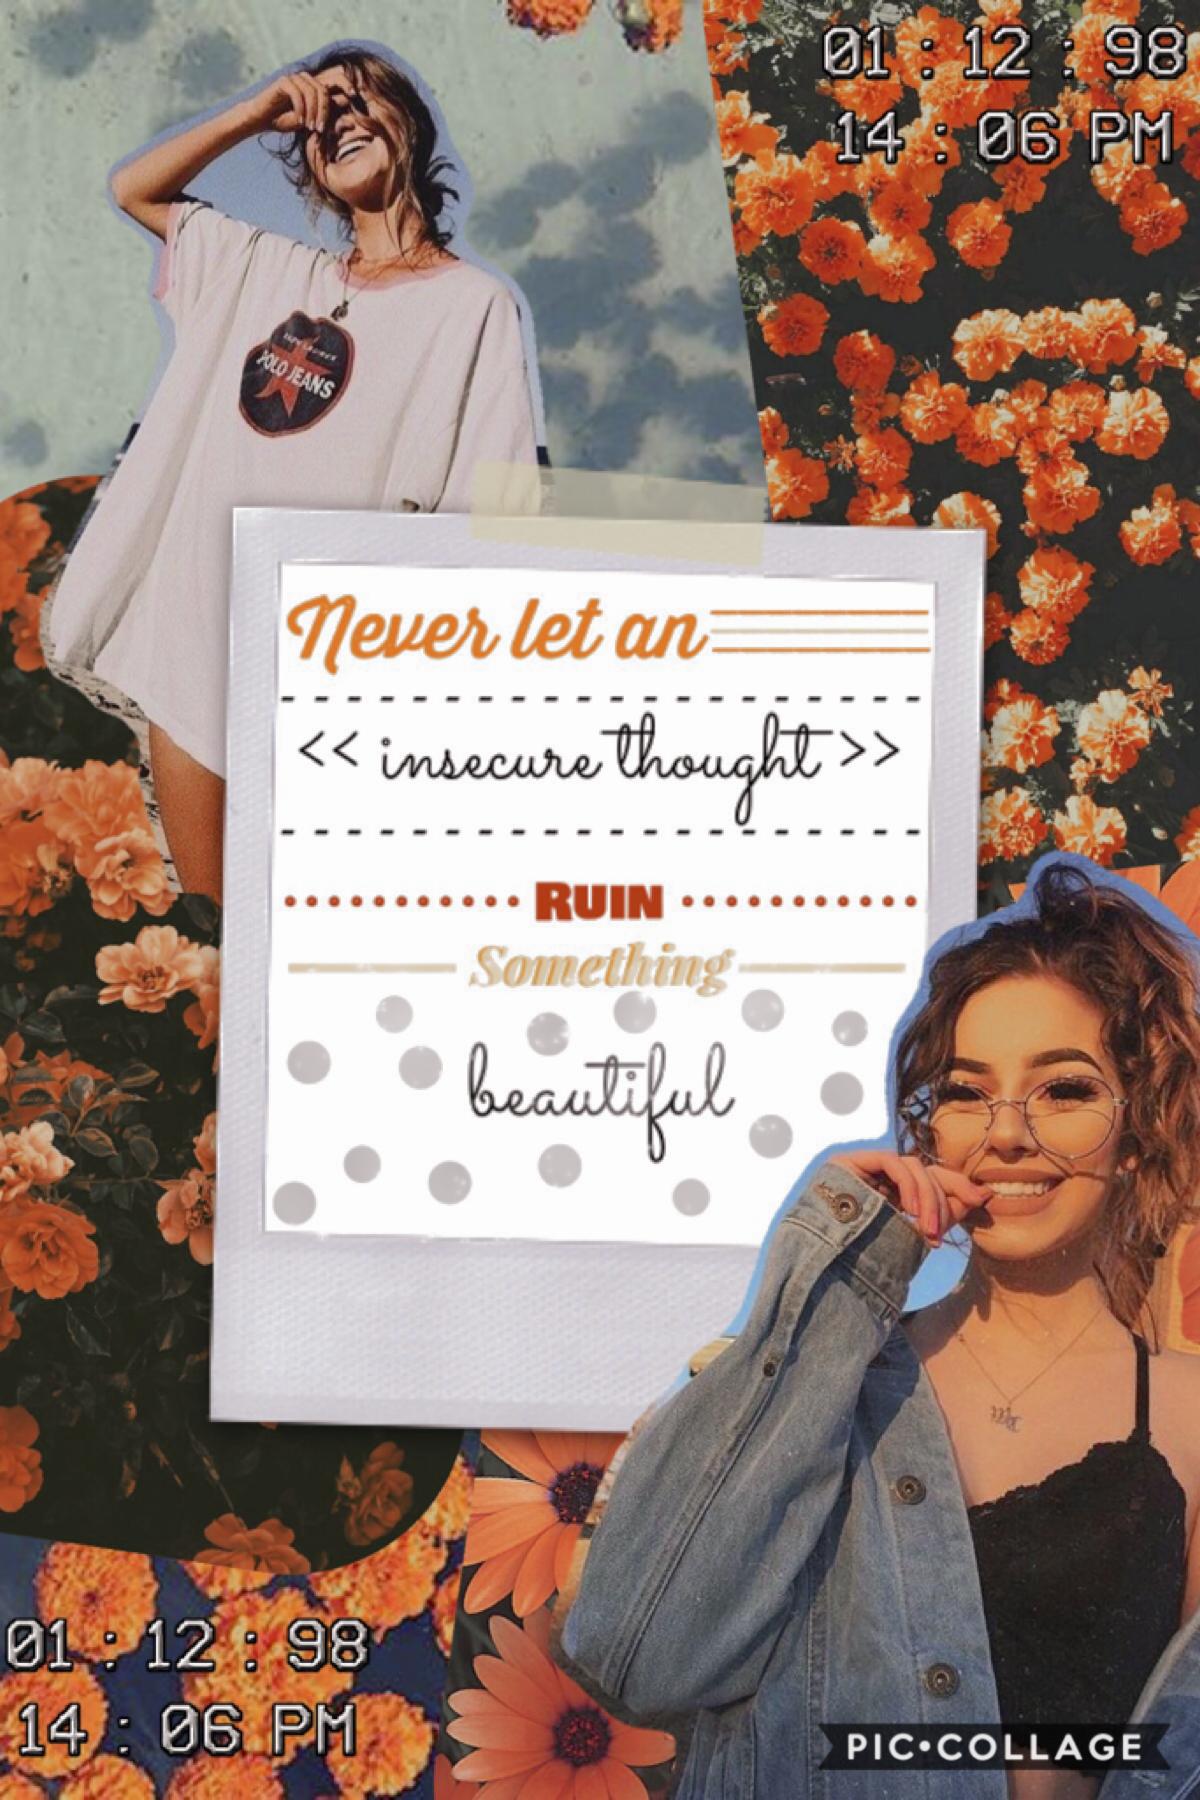 ✨tap✨

Hi everyone, this is the collage for the Pinterest aesthetic. What do you think?